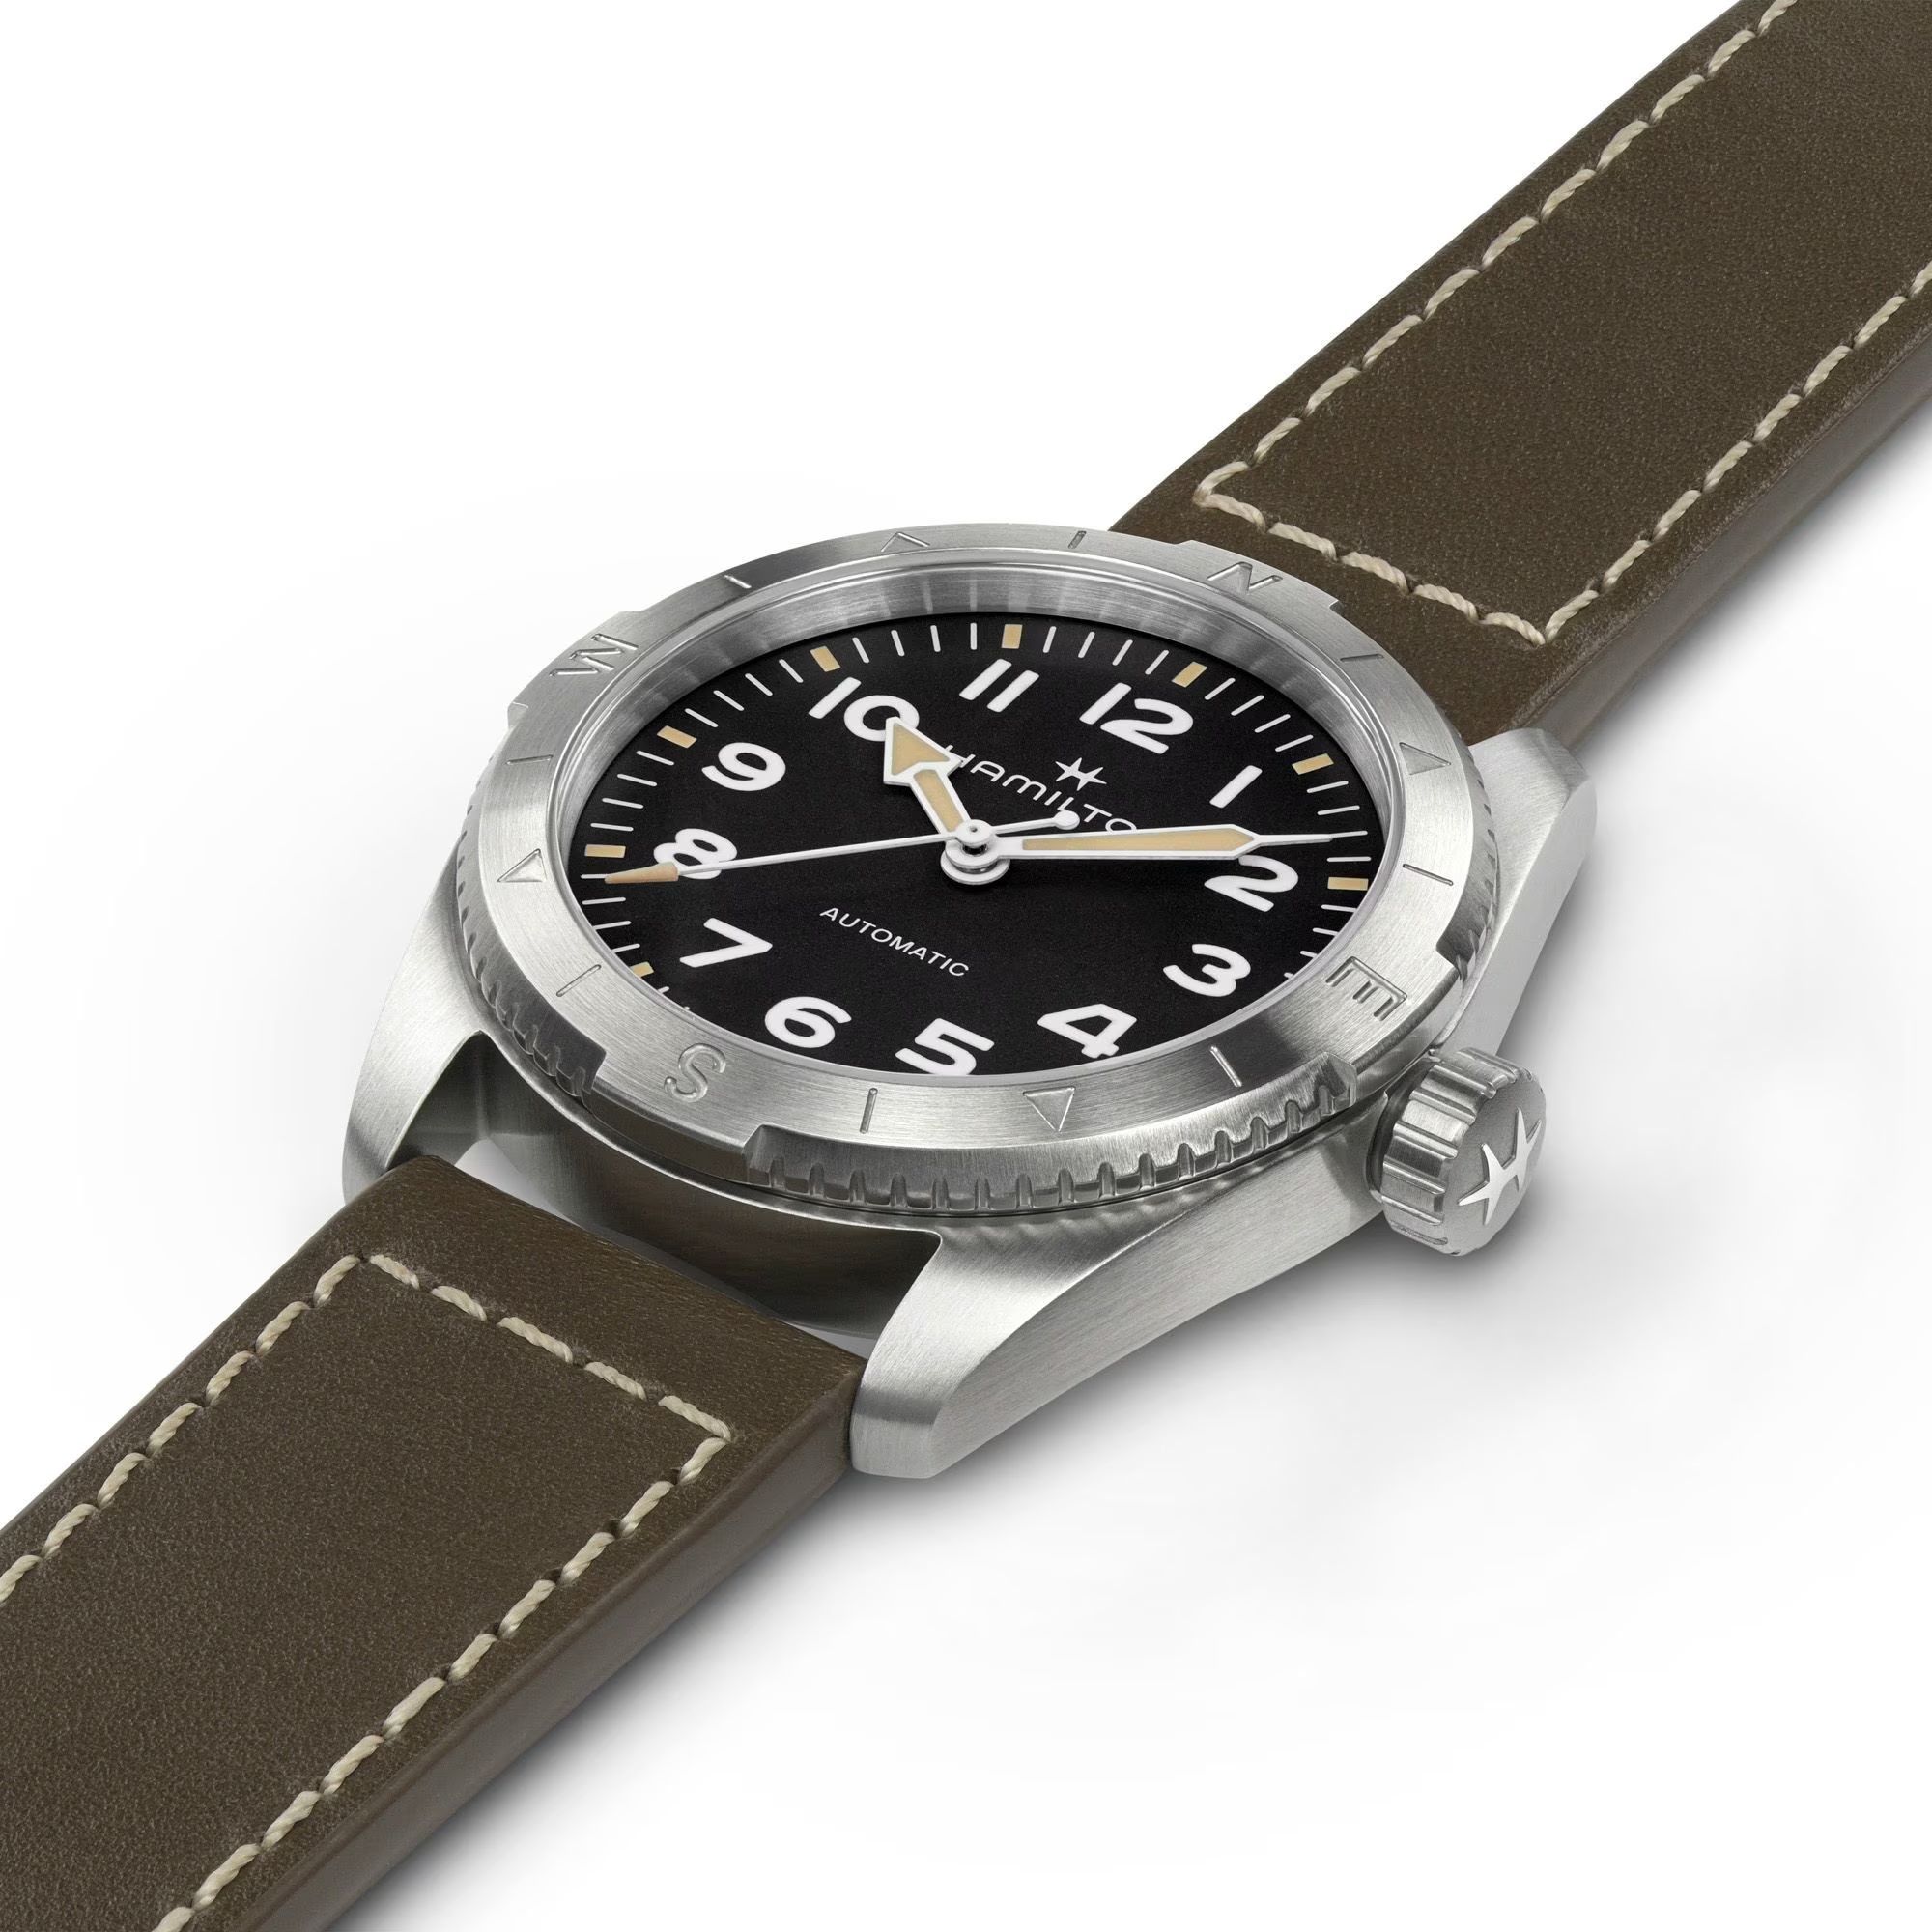 Khaki Field Expedition 37mm Automatic Strap Watch